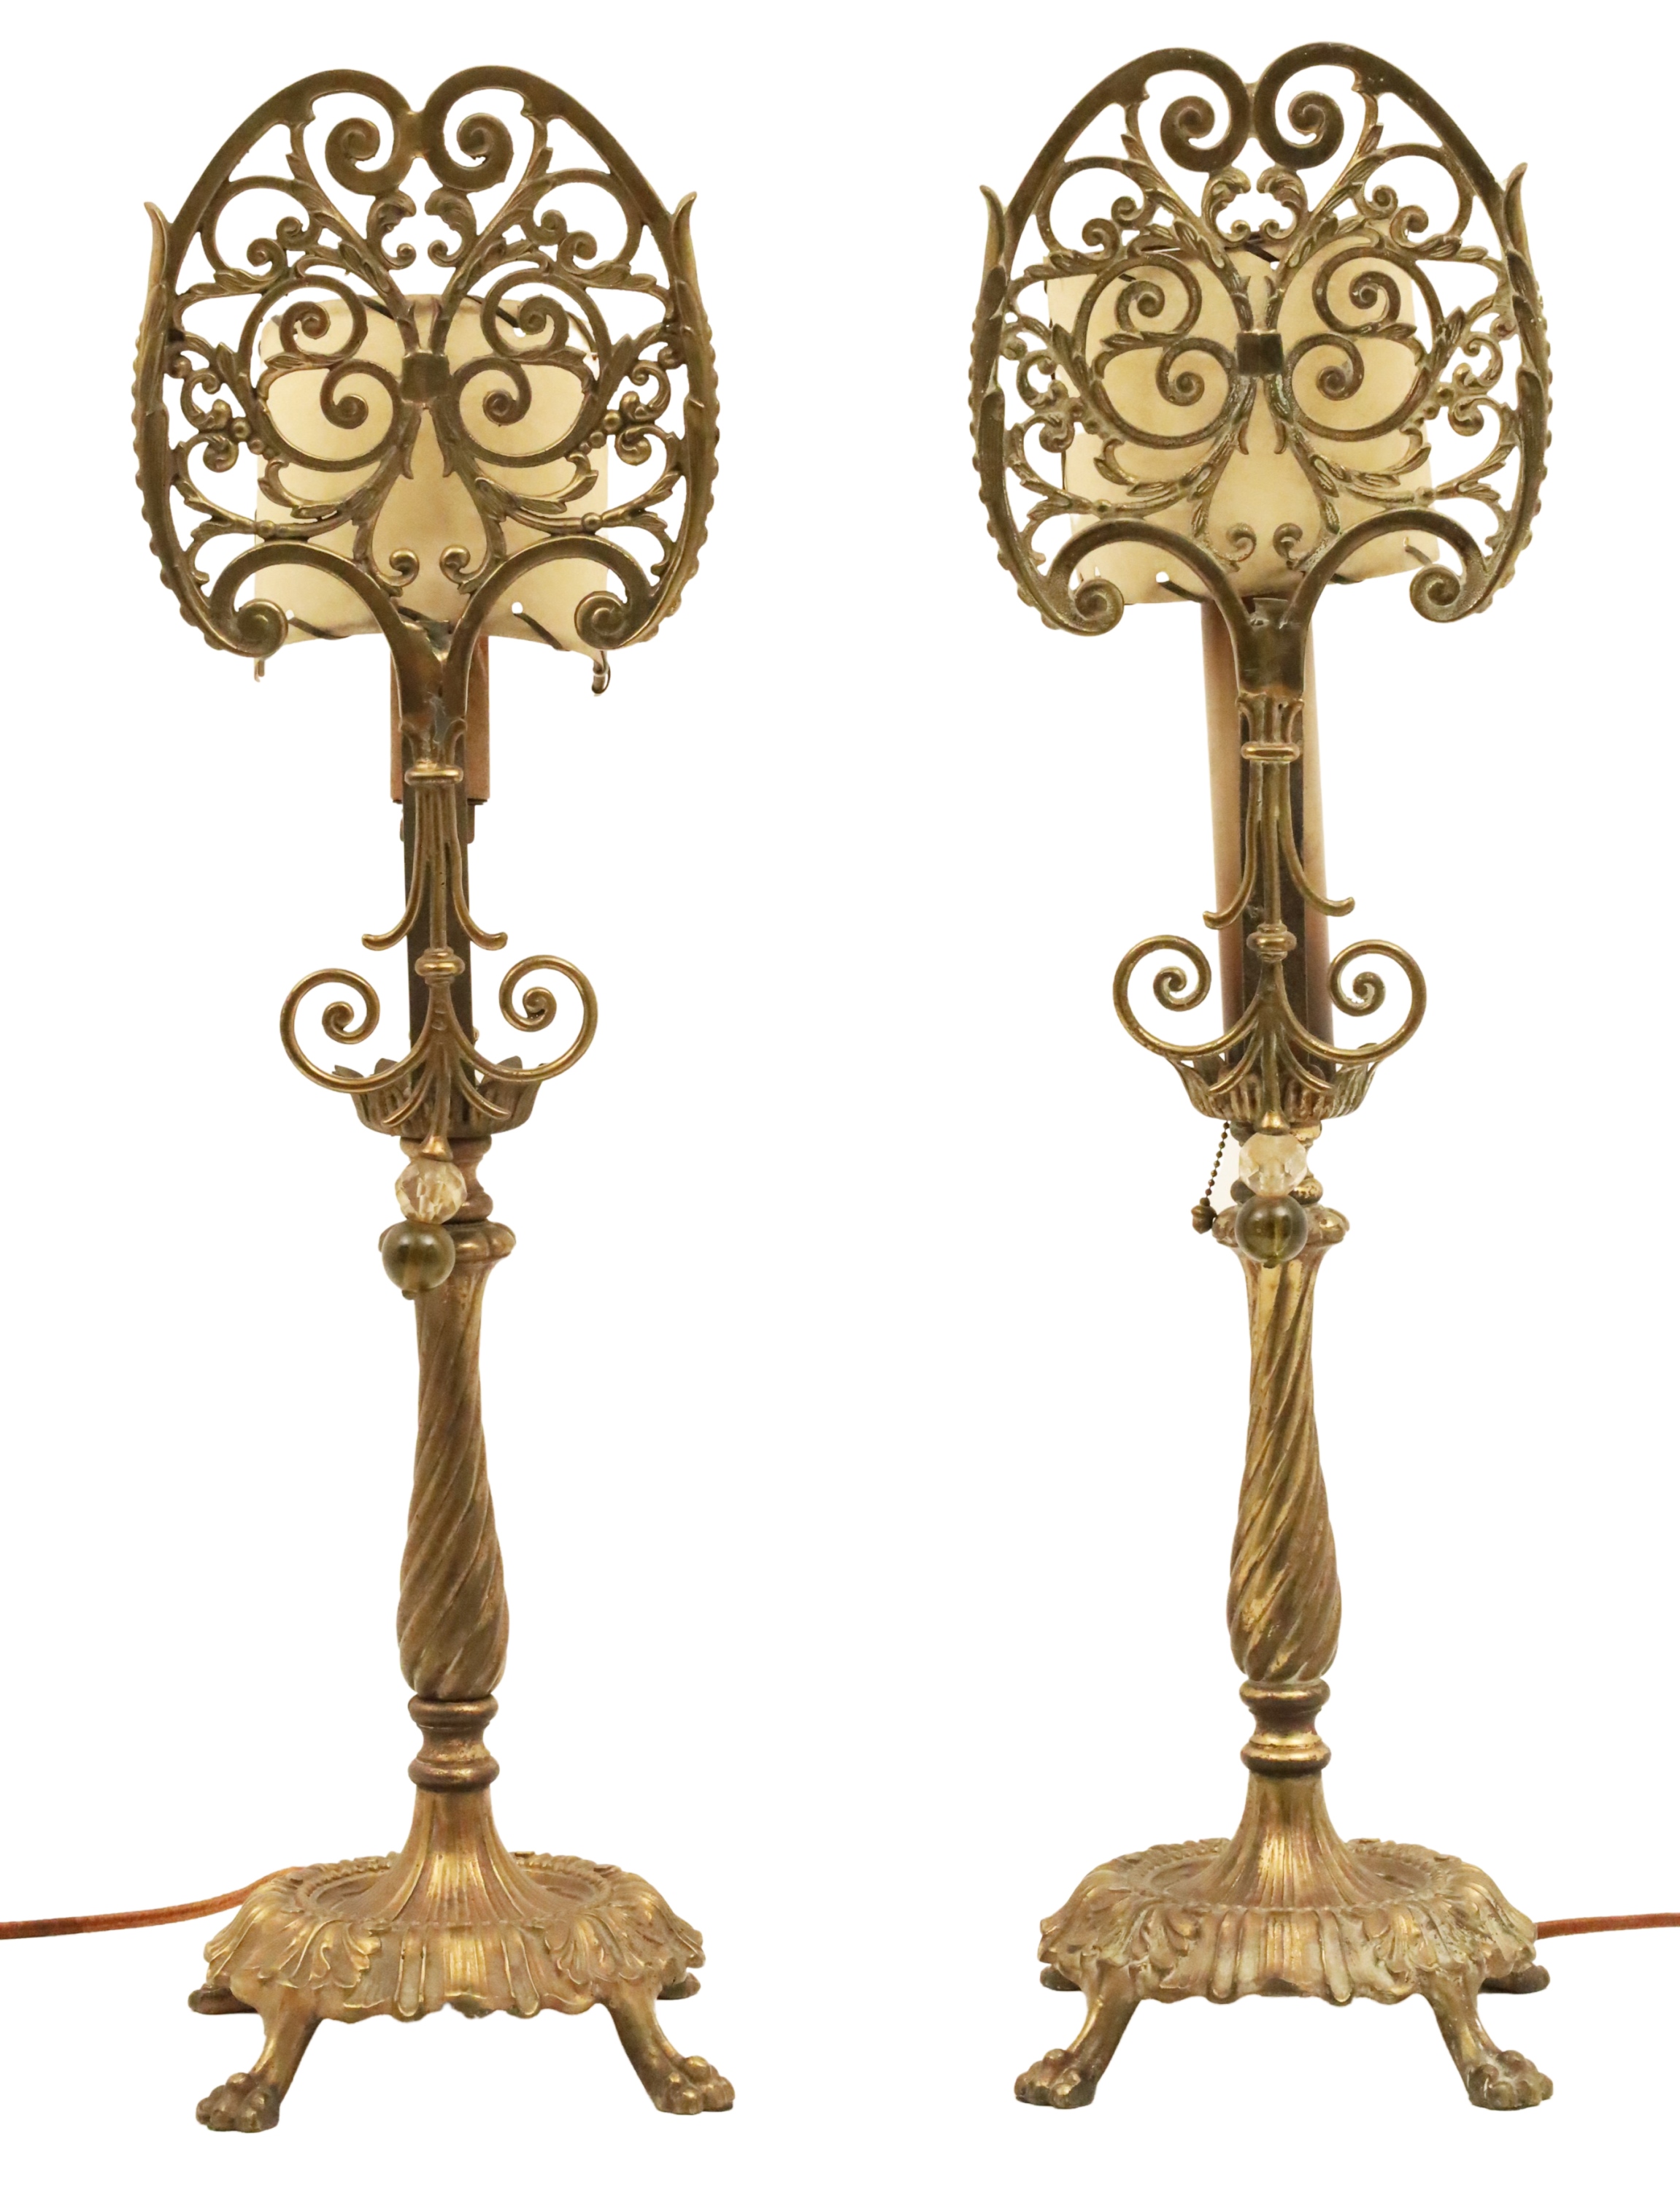 PAIR OF FRENCH METAL BOUDOIR LAMPS 2a57d2